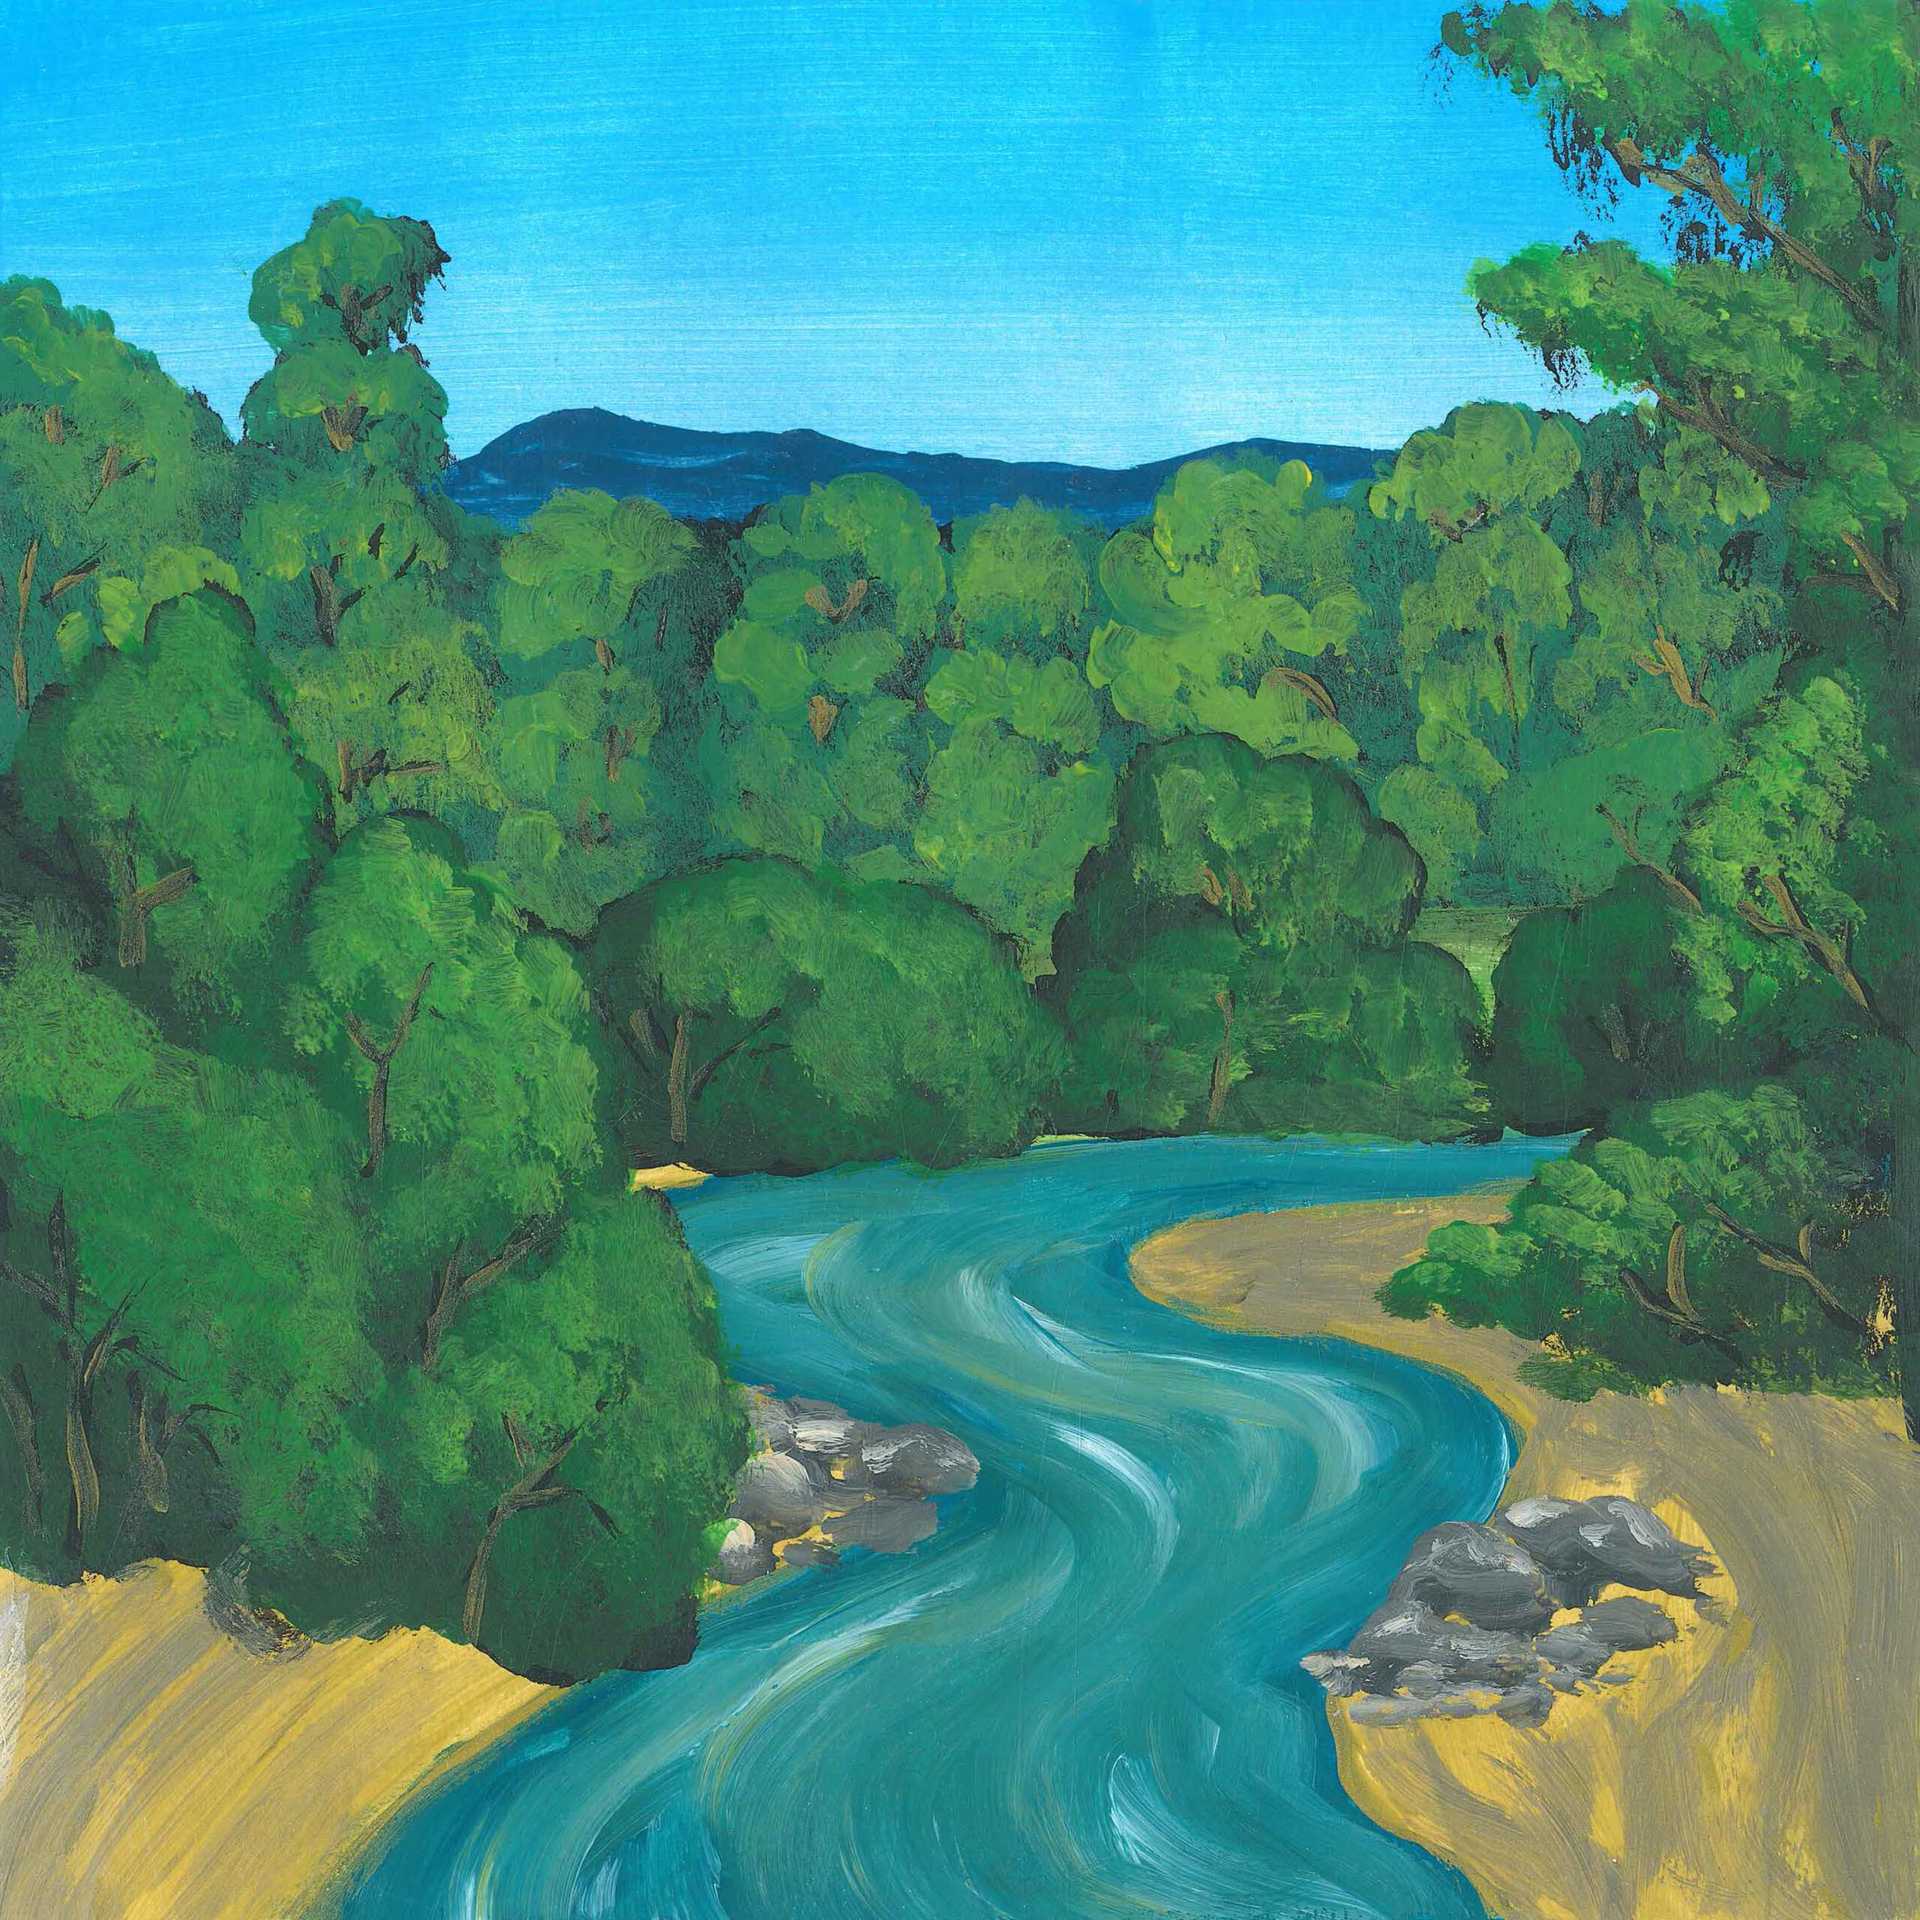 Calm Morning at Riverbed in the Borneo Jungle - nature landscape painting - earth.fm